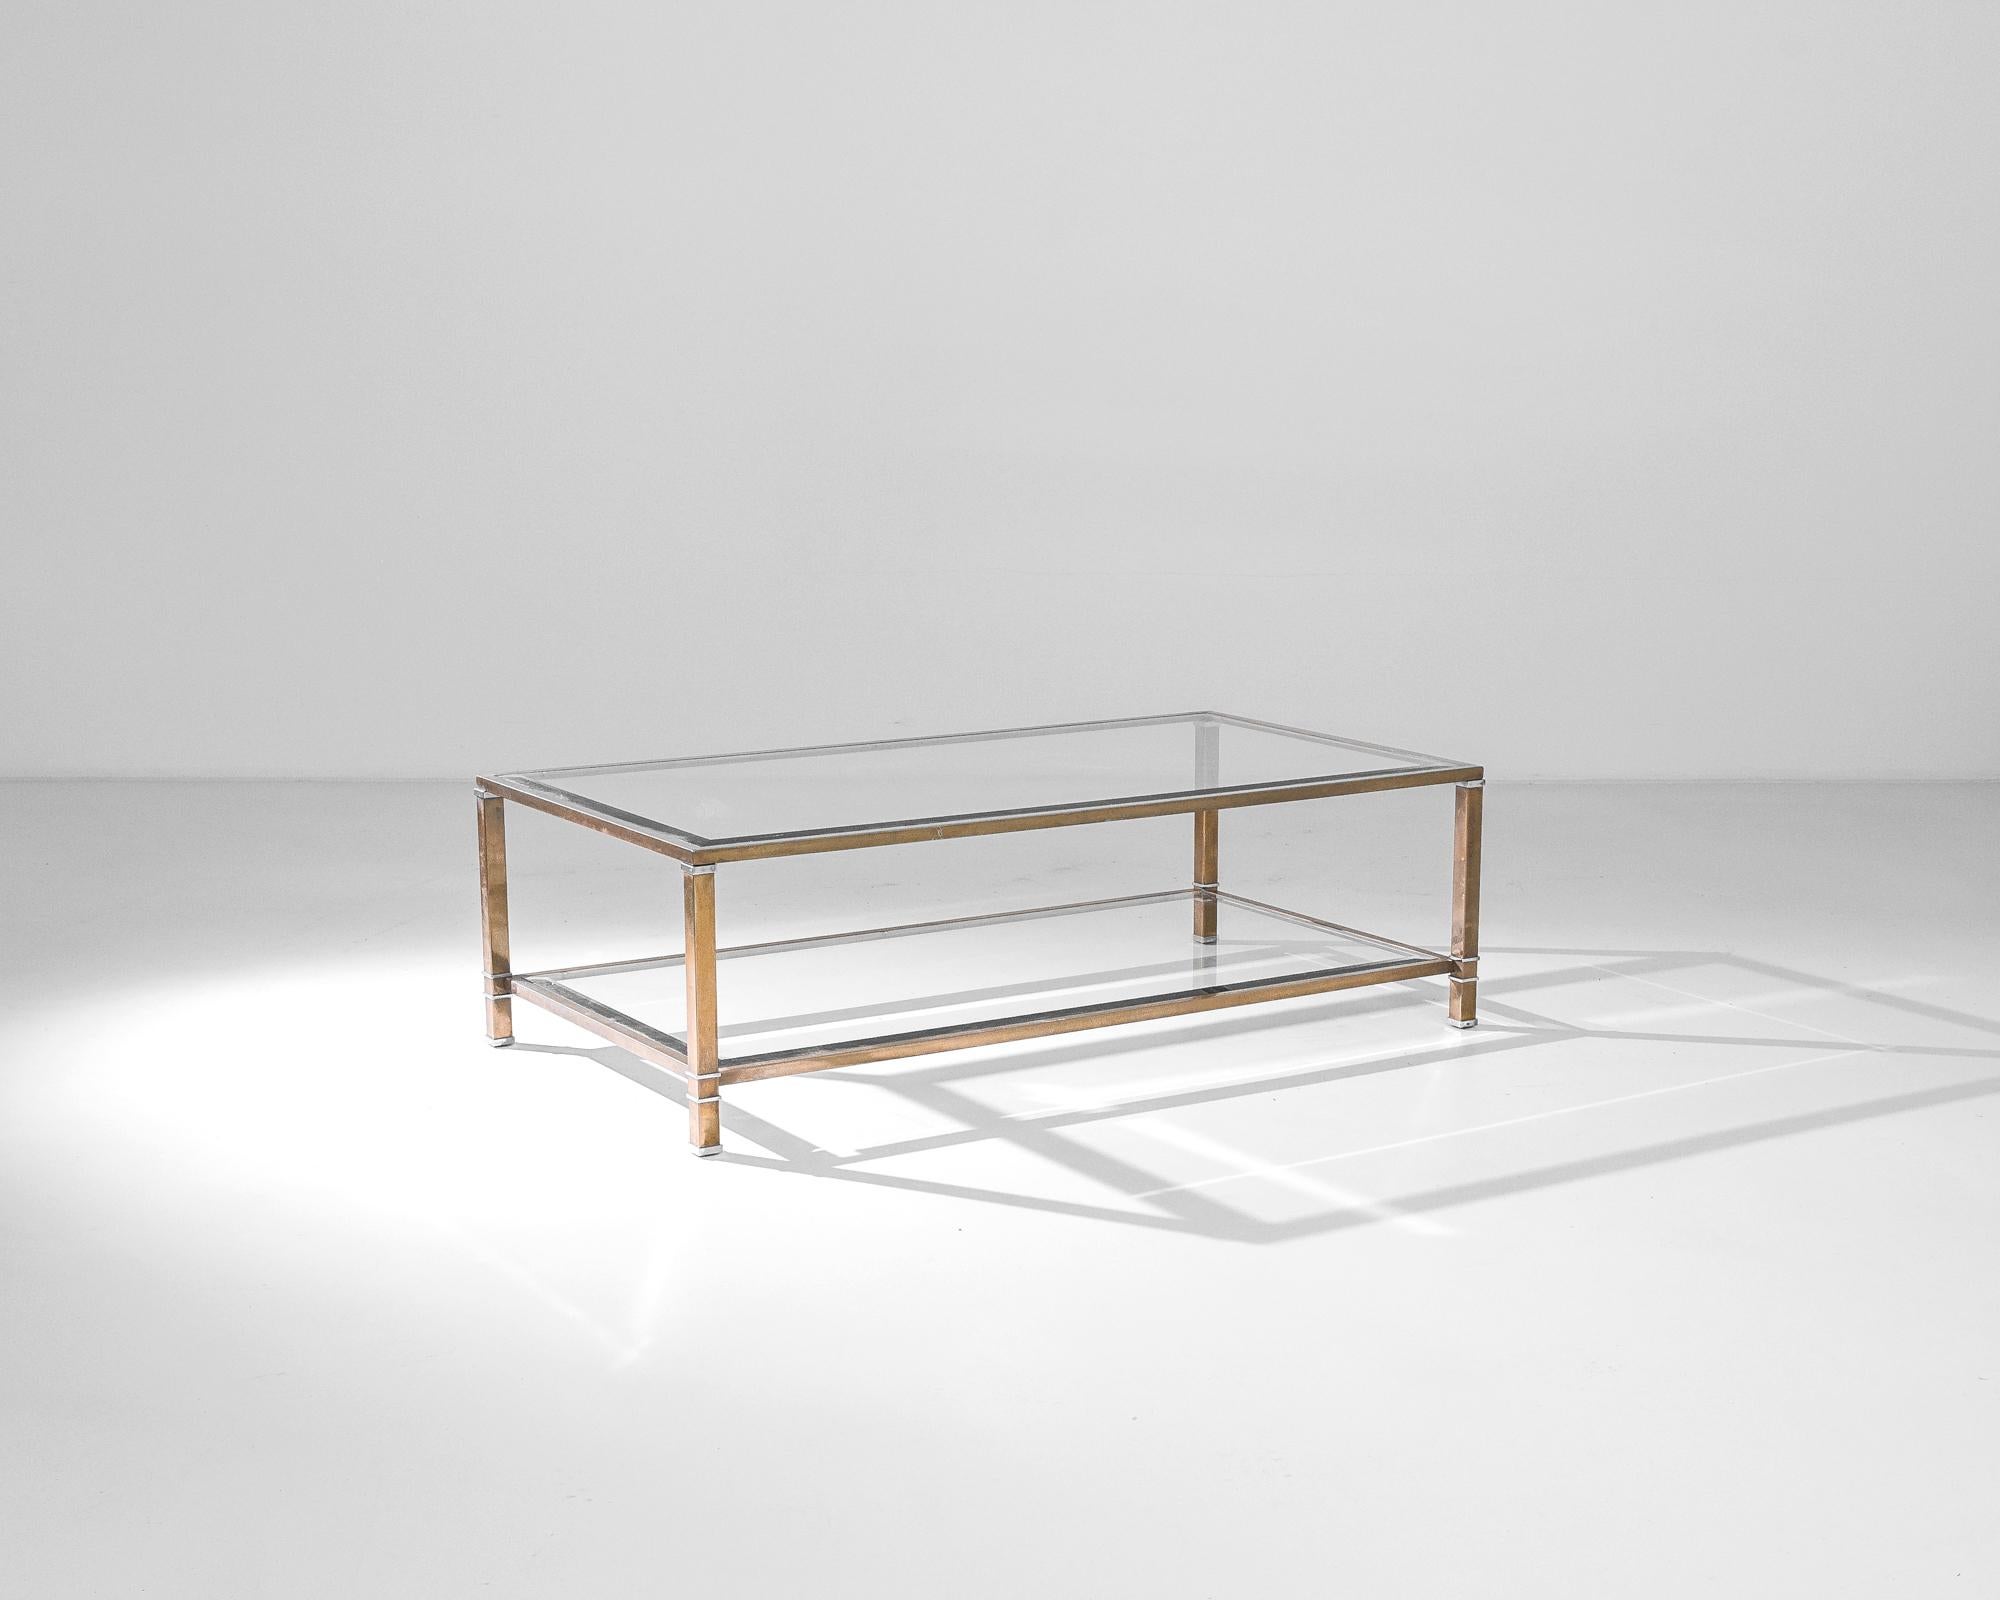 Made in France circa 1950, this coffee table displays an elegant silhouette. Sleek materials and details– plated brass and bevel cut glass– emphasize the Midcentury chic. A metallic structure, supporting two glass shelves, provides an industrial